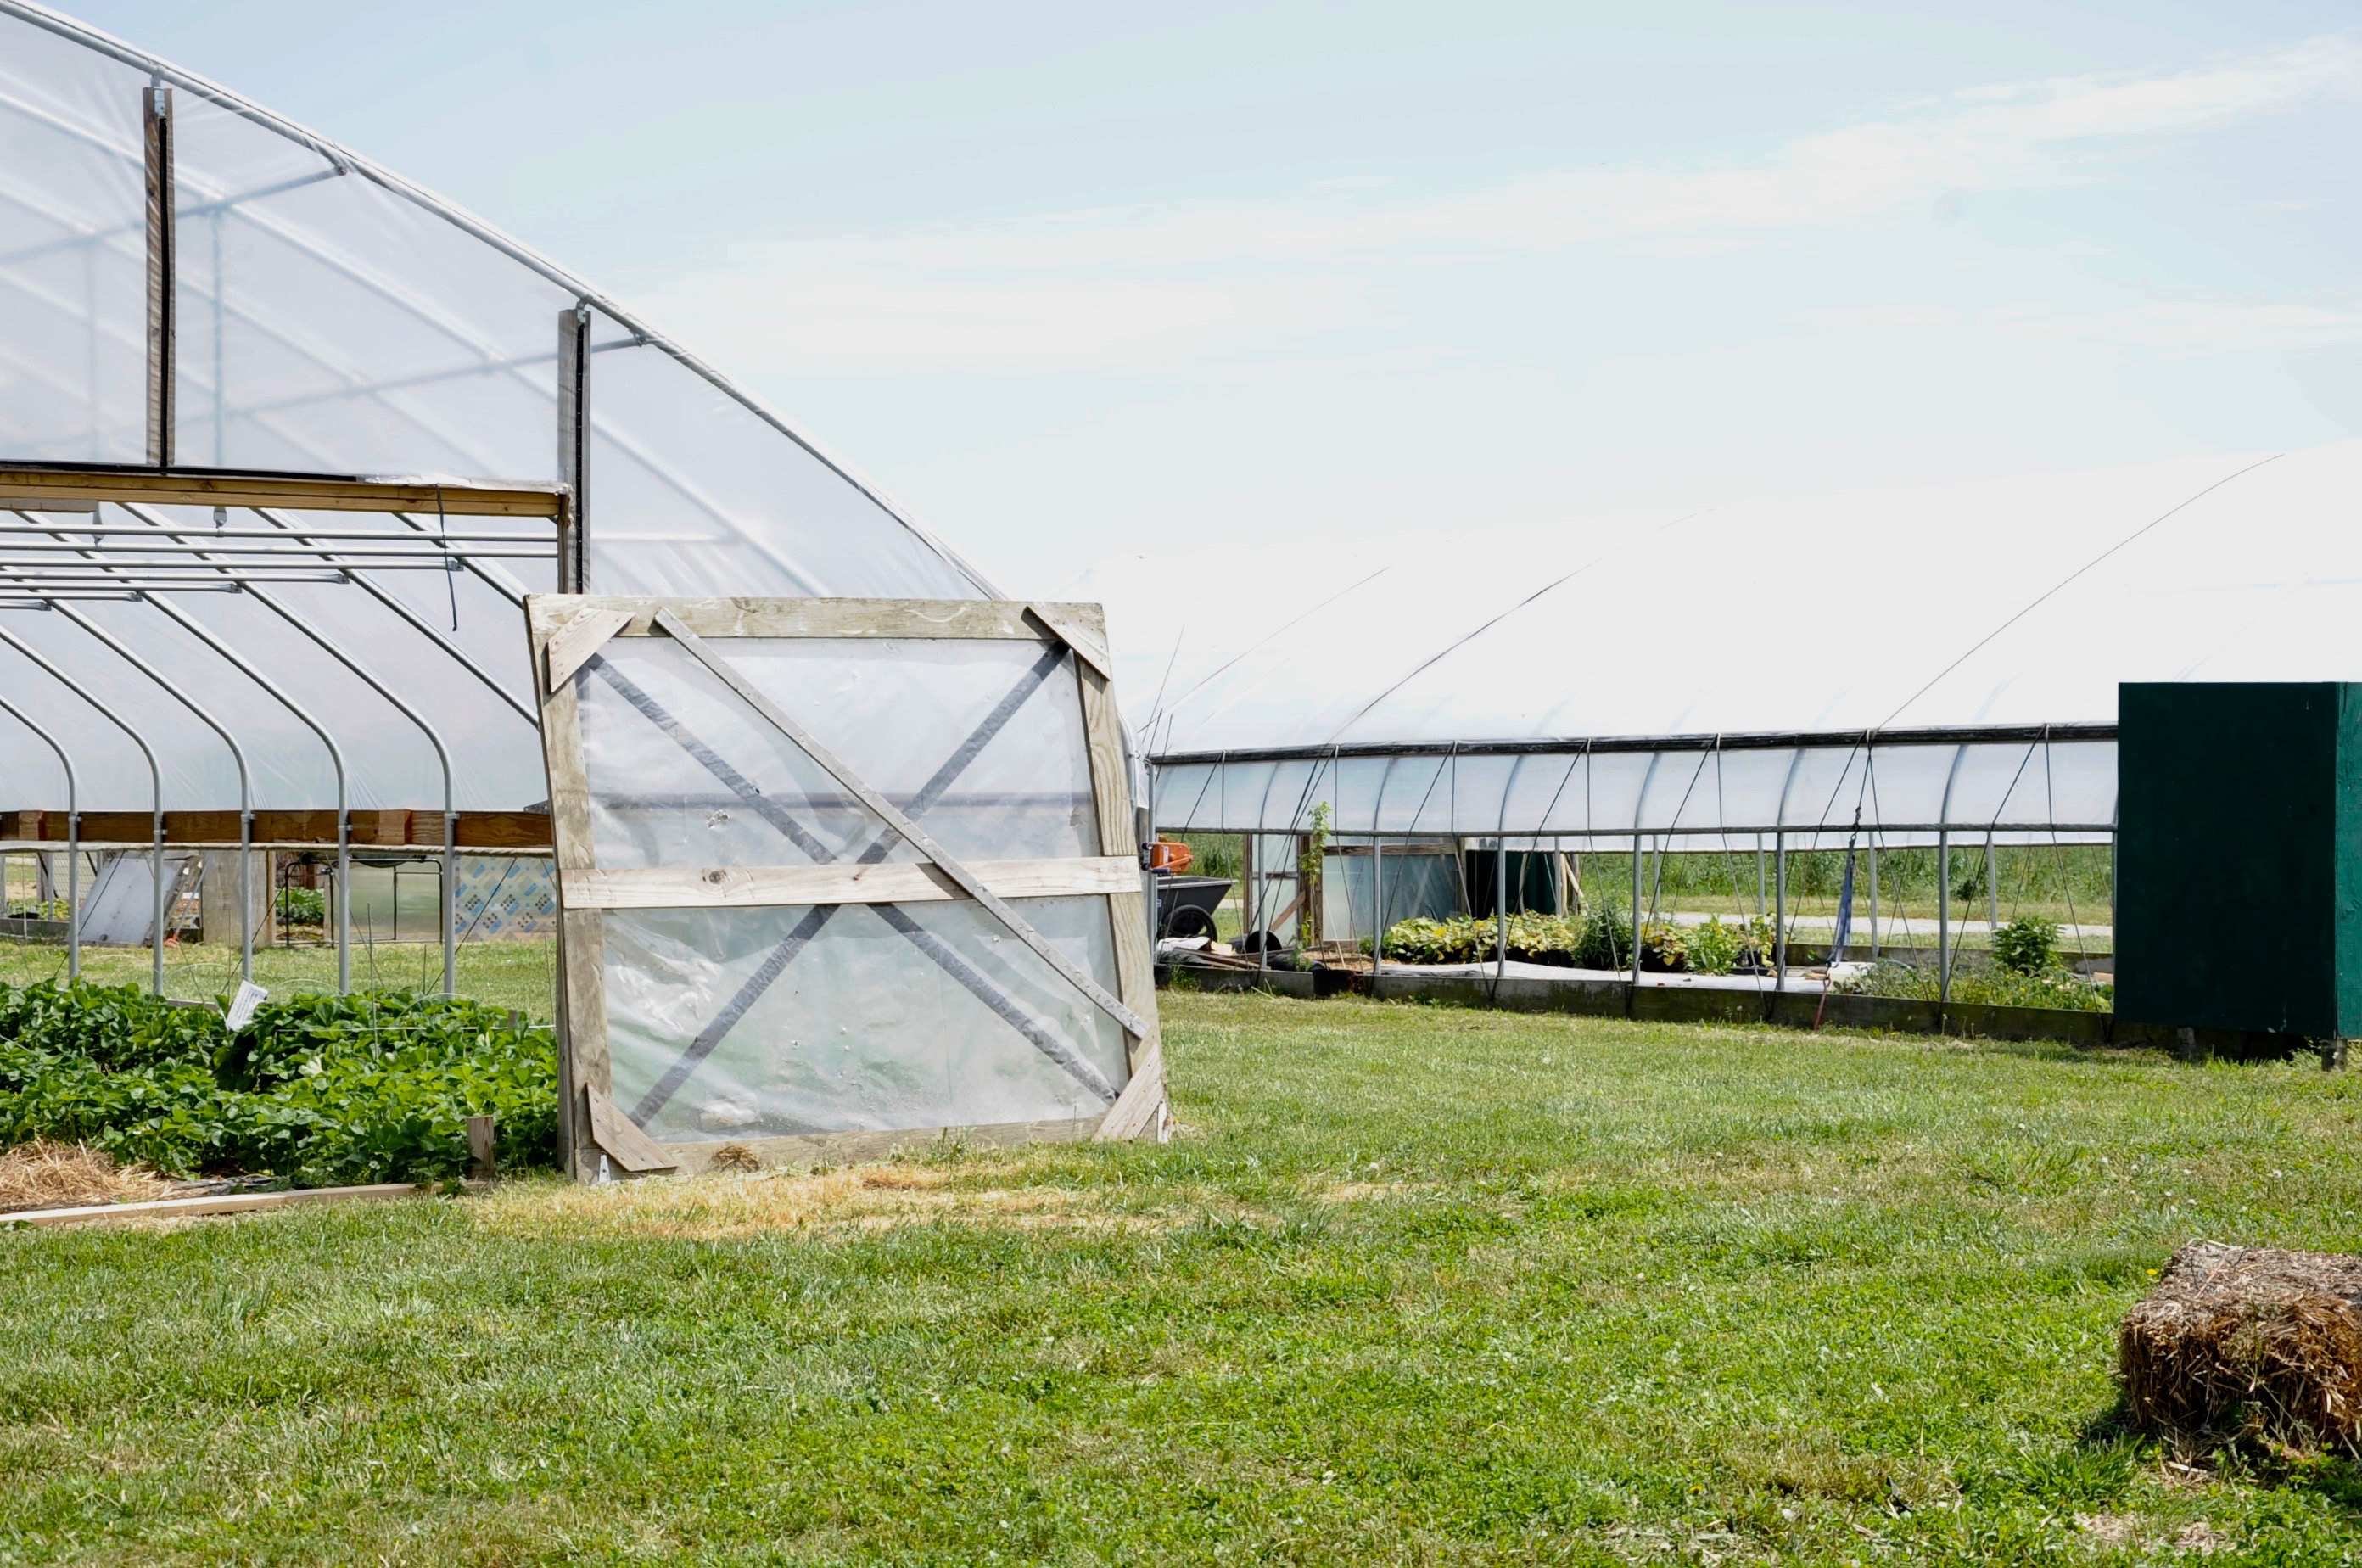 High tunnels at DSU's Outreach and Research Center in Smyrna, Delaware are used to showcase the benefits of extending the growing season for crops.